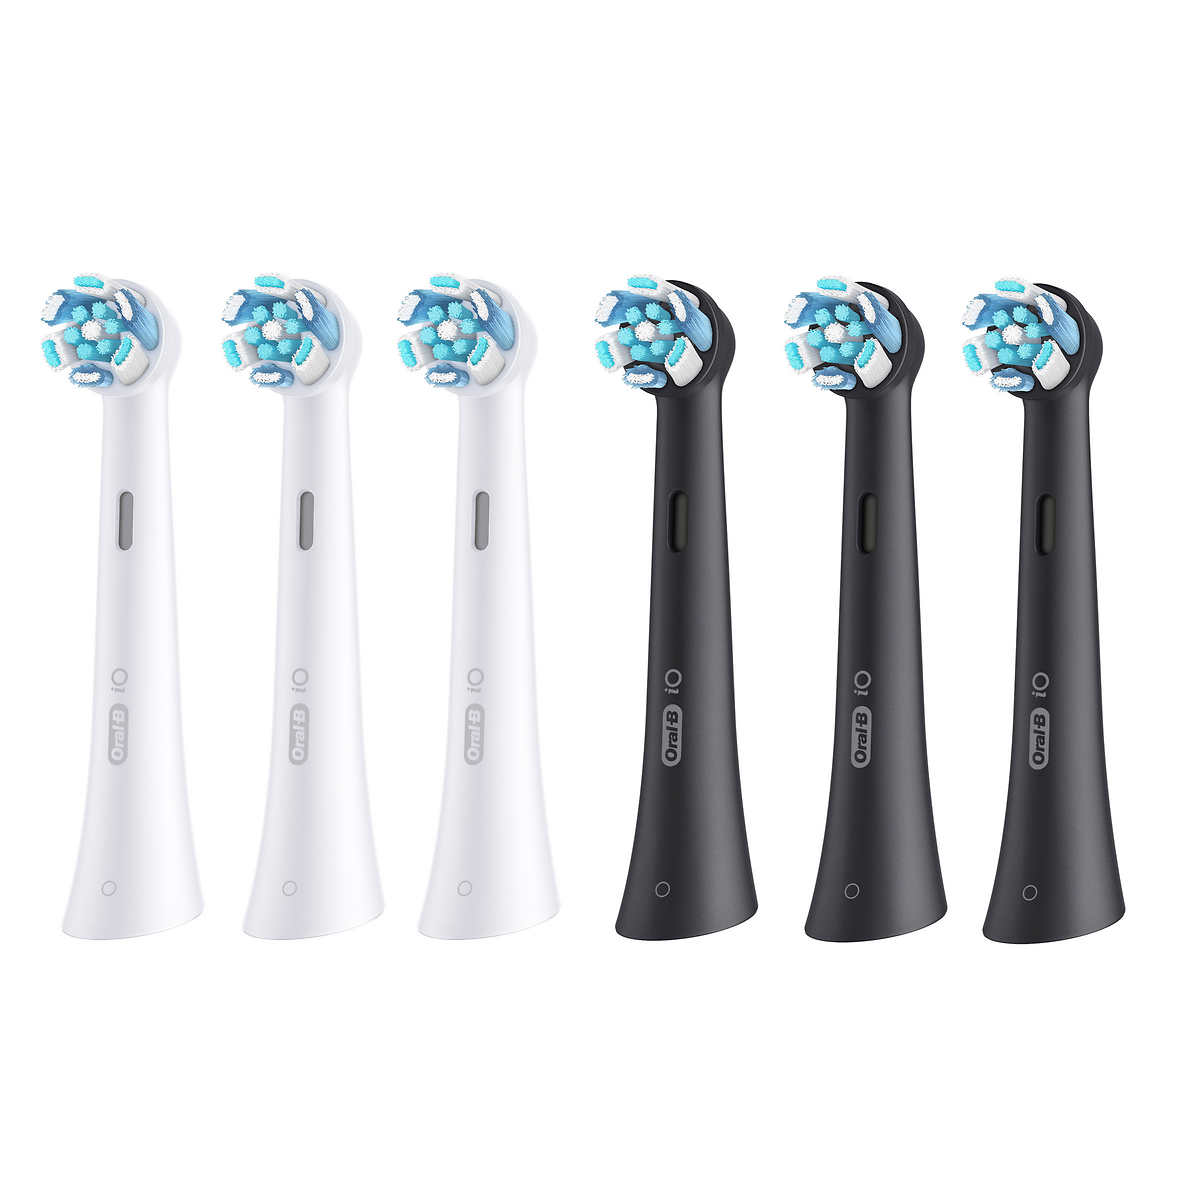 Costco: Oral-B iO Series Replacement Toothbrush Heads, 6-count - $43.99